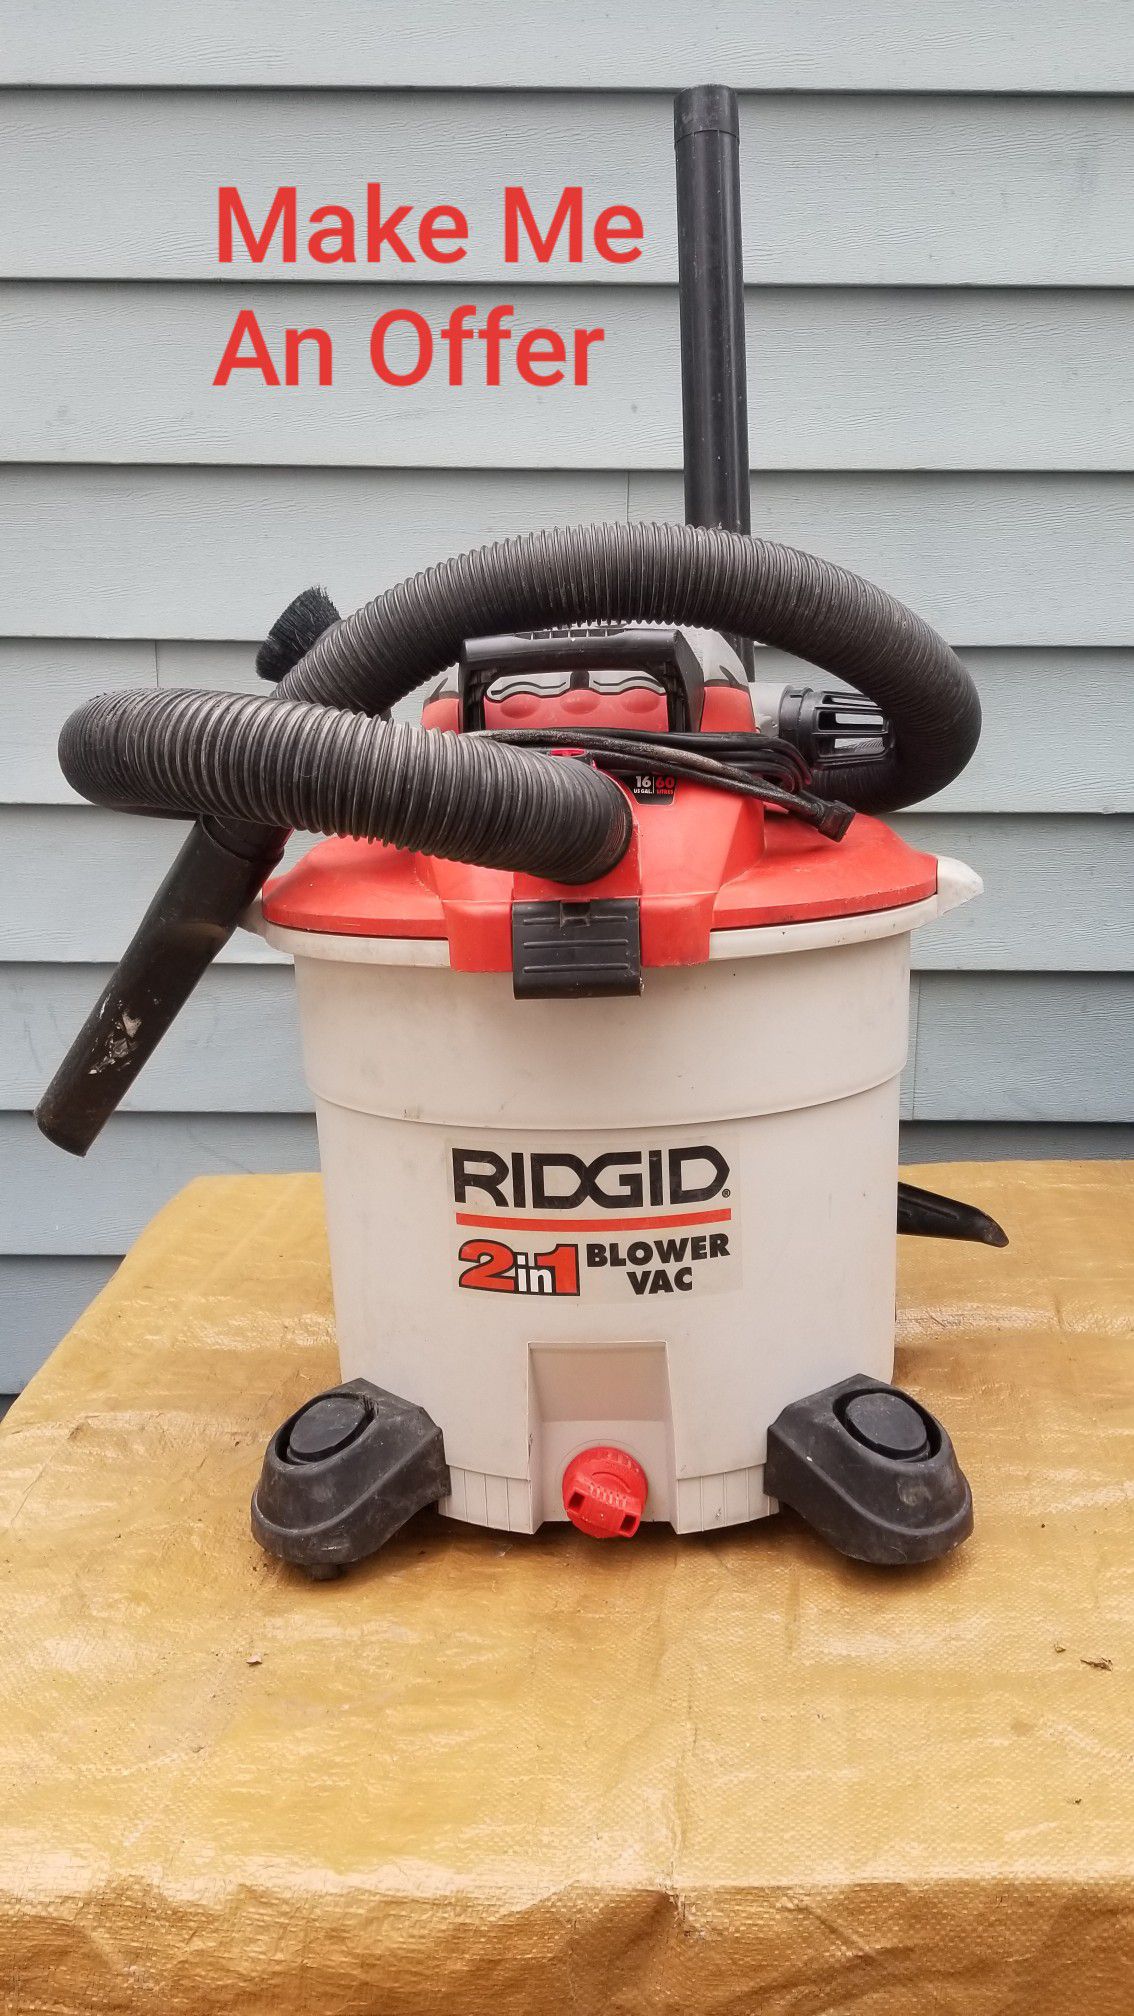 Shop Vac, Rigid Brand ~ Unit Pre-owned, in Excellent Working/Cosmetic Conditon